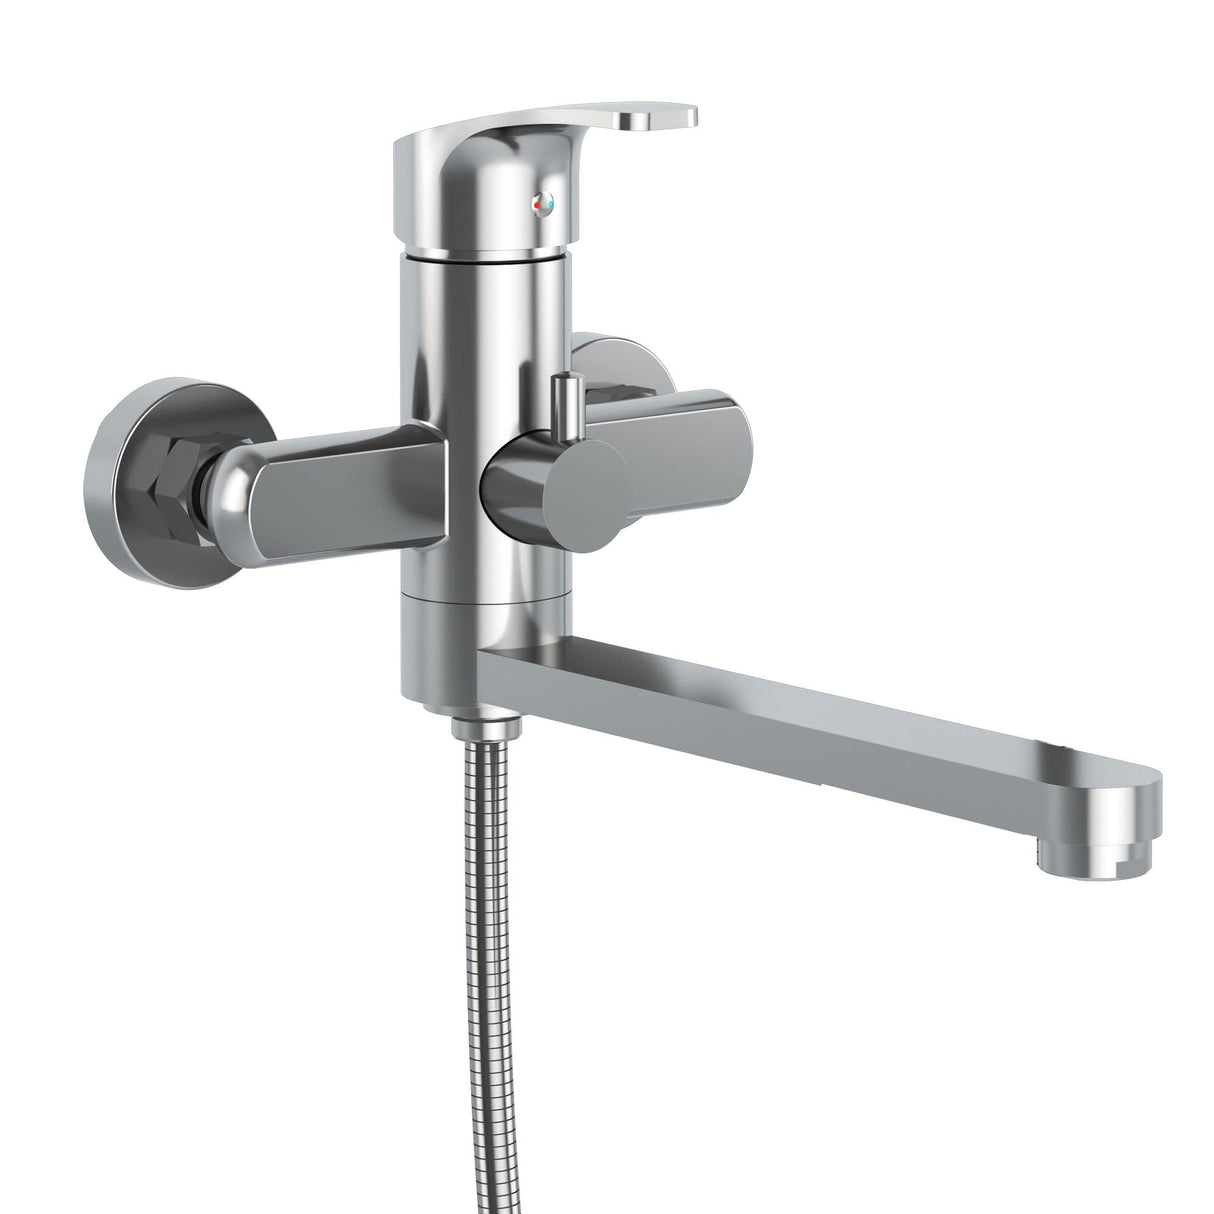 PULSE ShowerSpas 3030-WMTF-CH Wall Mounted Tub Filler in Chrome